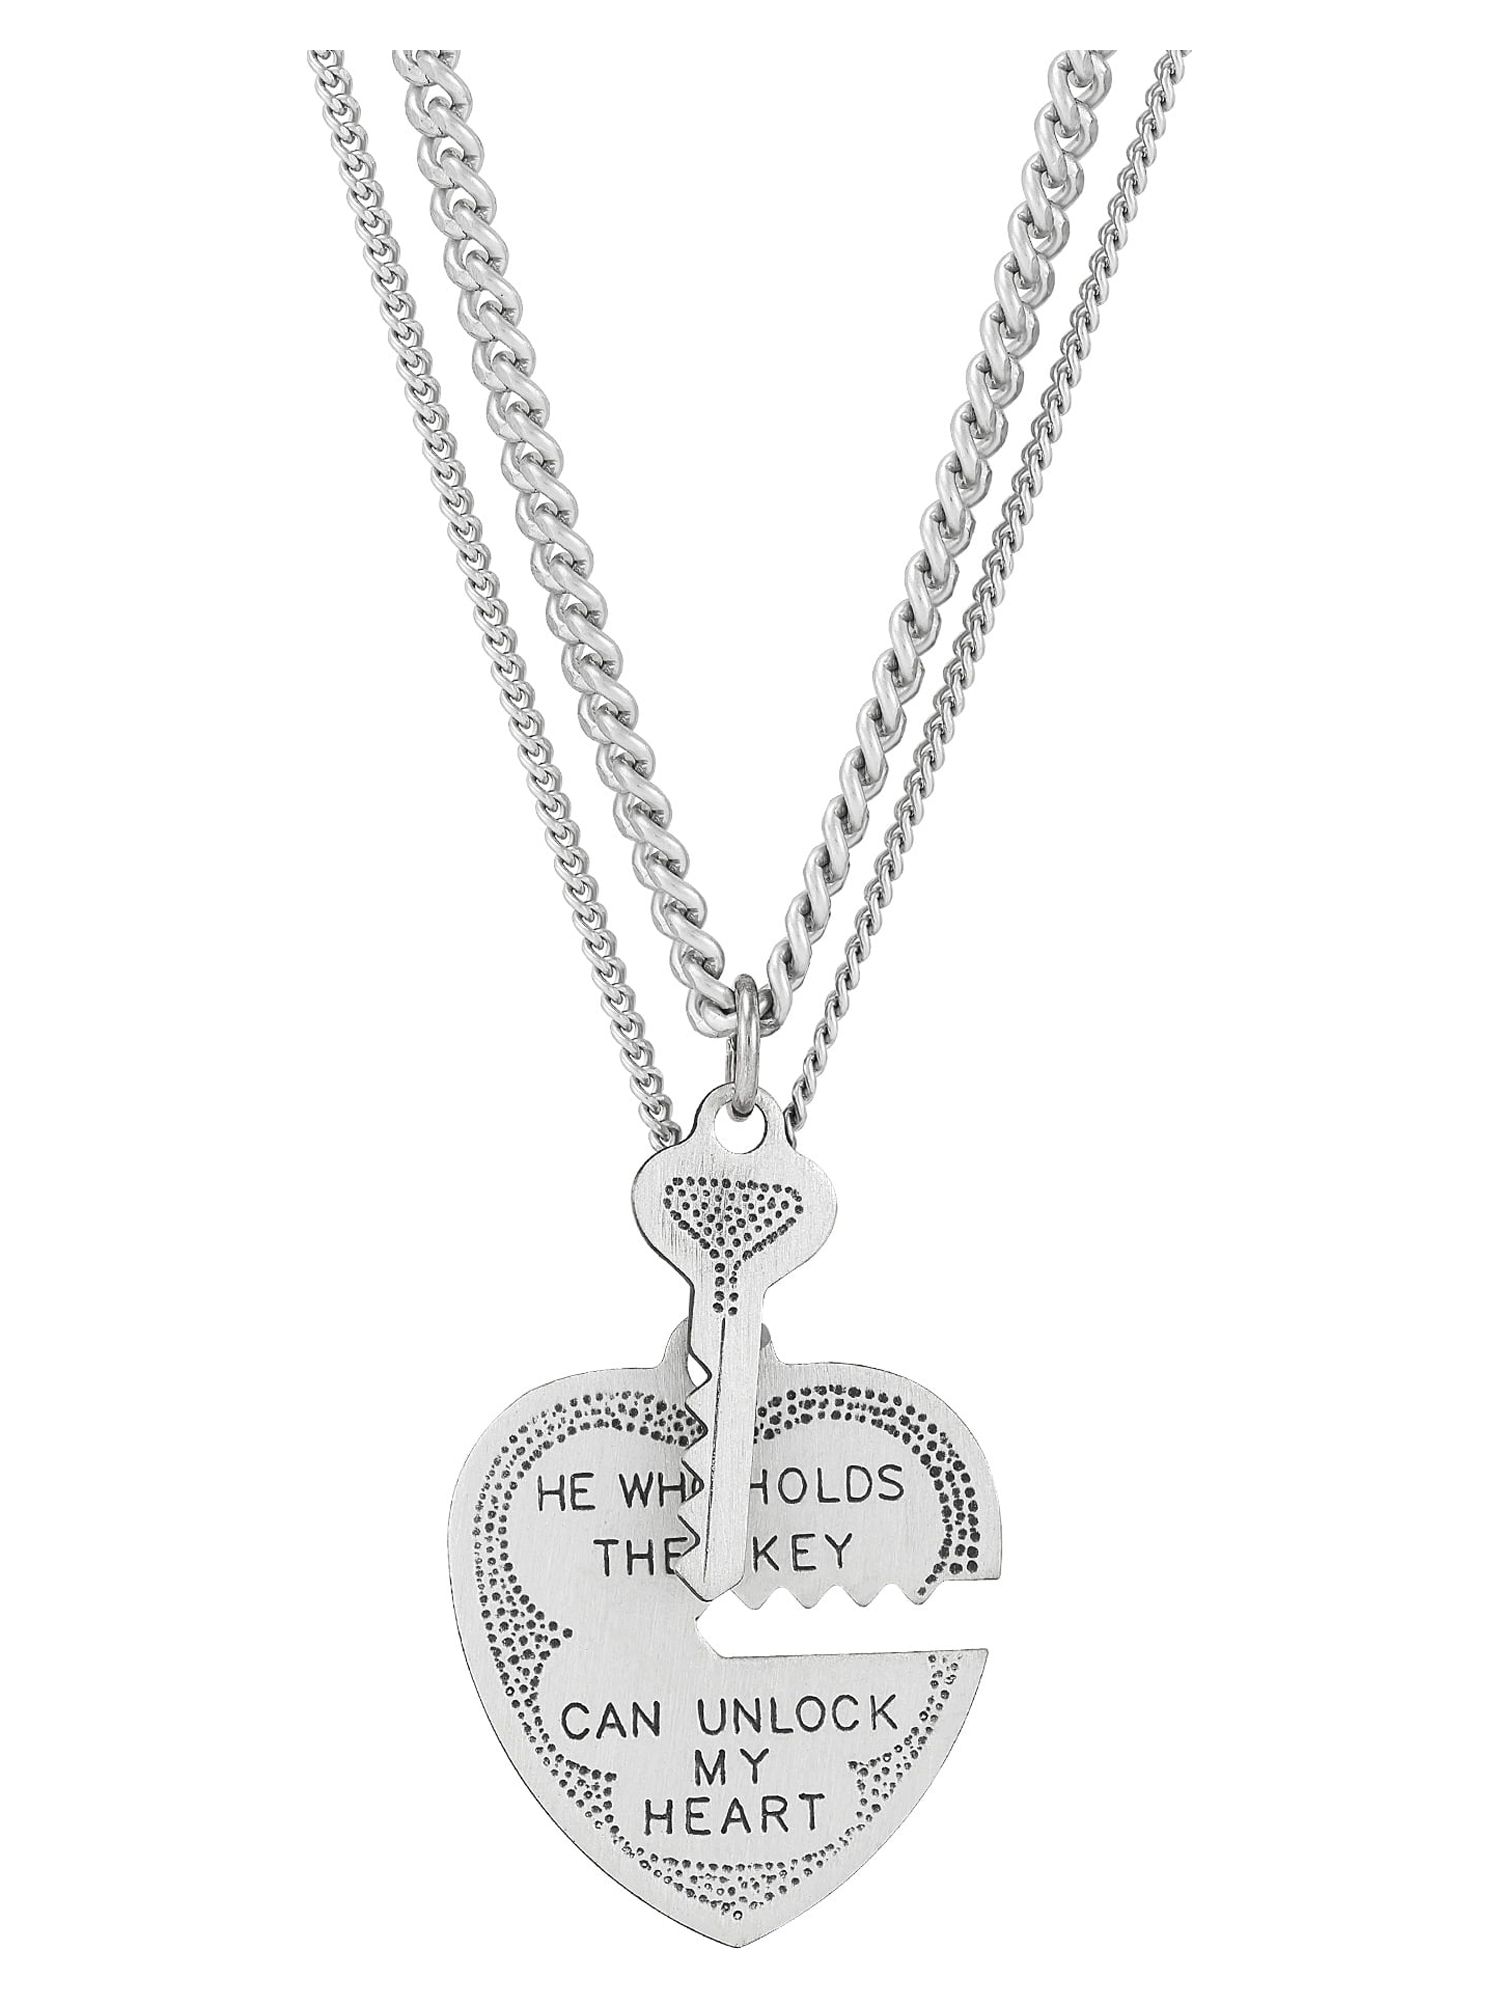 Brilliance Fine Jewelry Sterling Silver Breakable Heart Key Pendant Necklace Set,18" - image 1 of 11